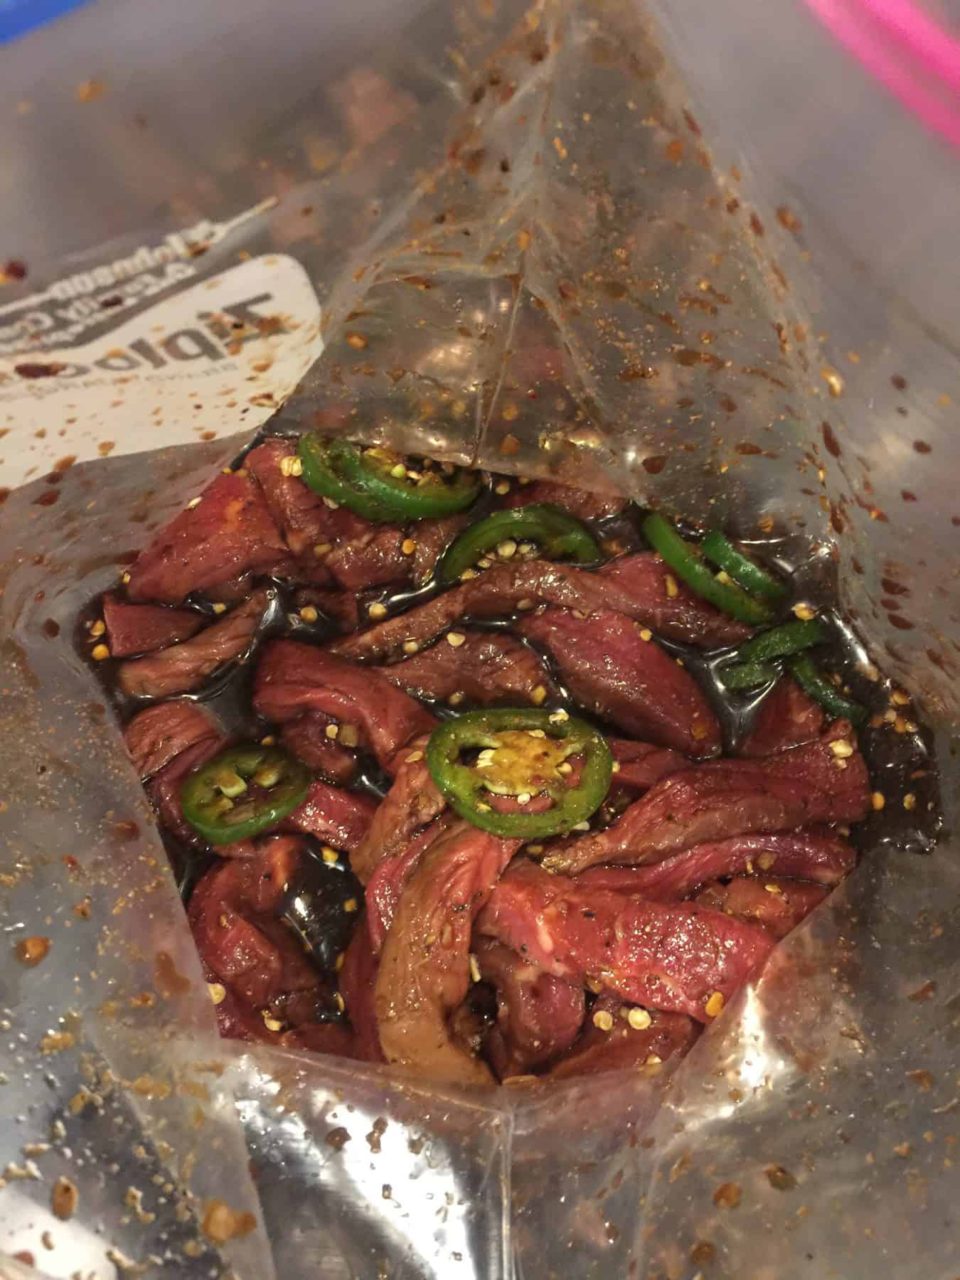 Meat & marinade in a zip top bag with jalapeno peppers for Sweet & Spicy Beef Jerky.